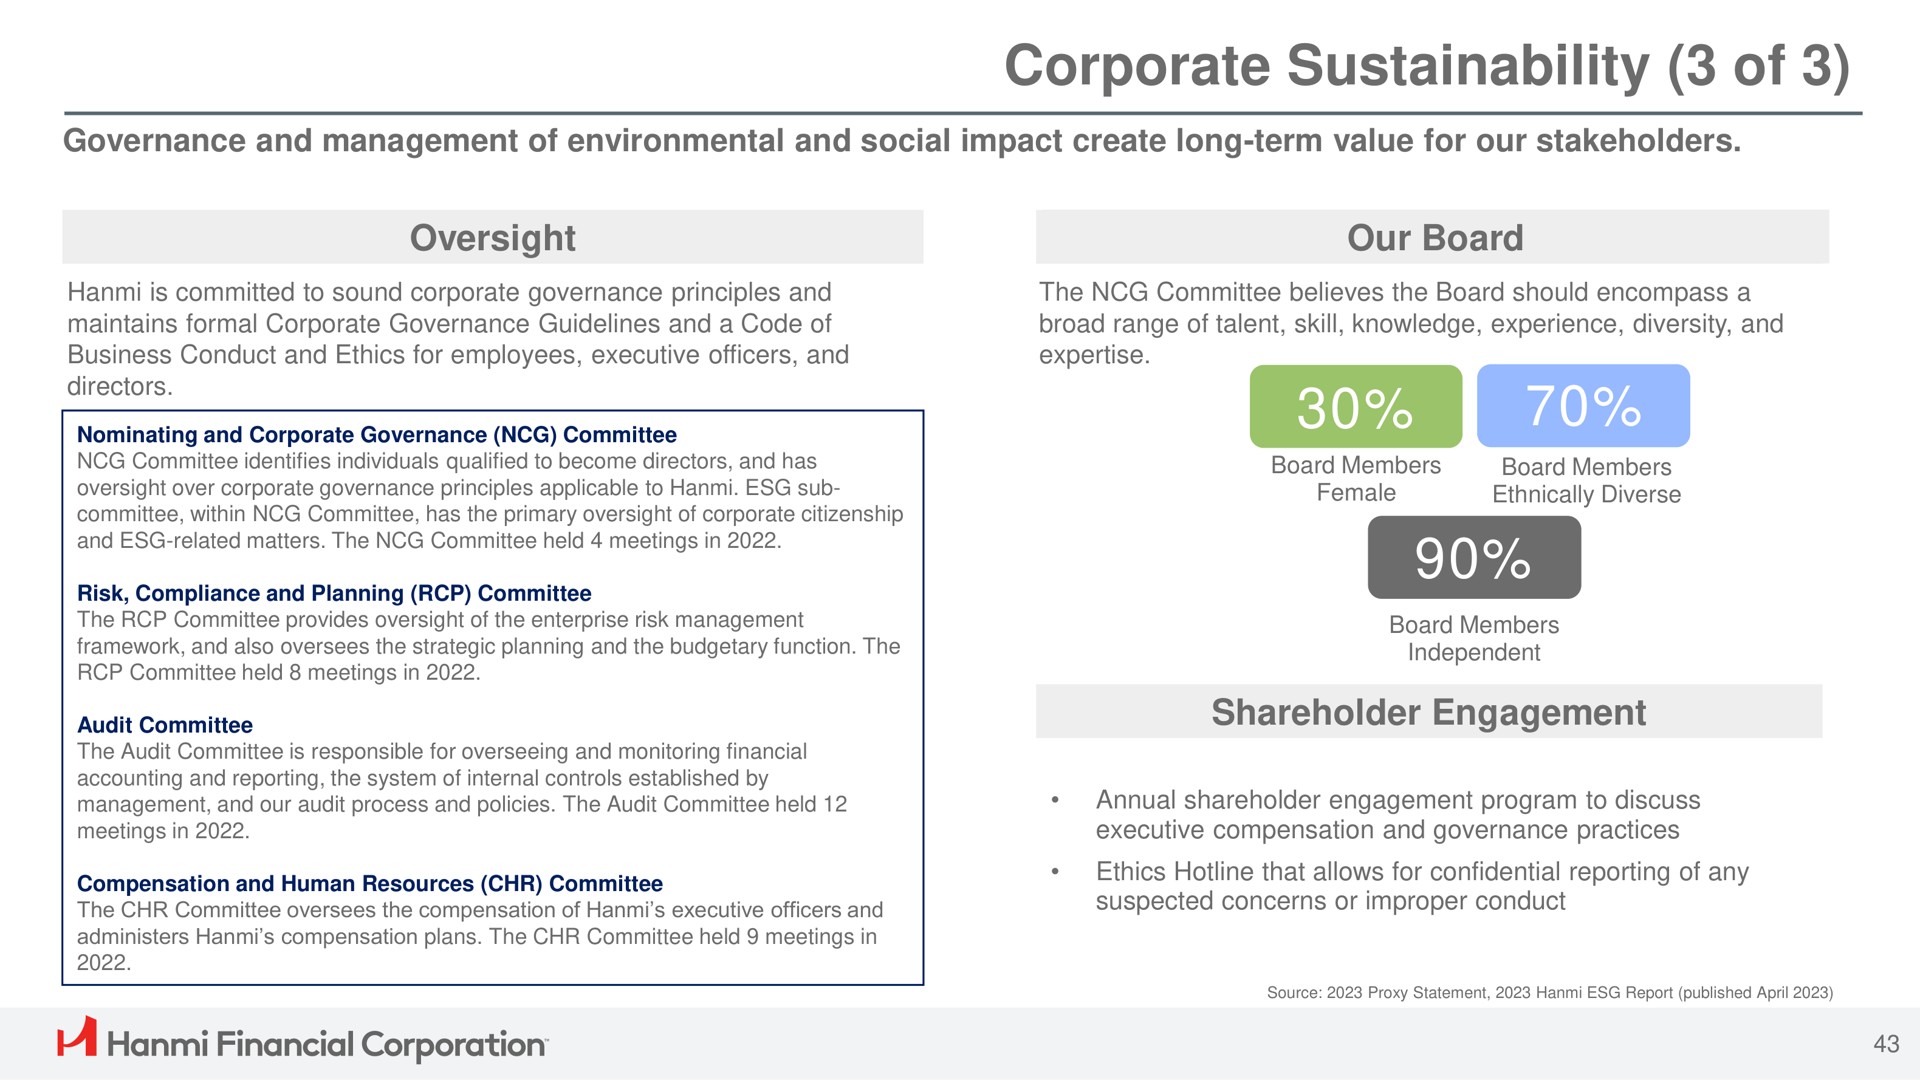 corporate of oversight our board diverse board members shareholder engagement financial corporation | Hanmi Financial